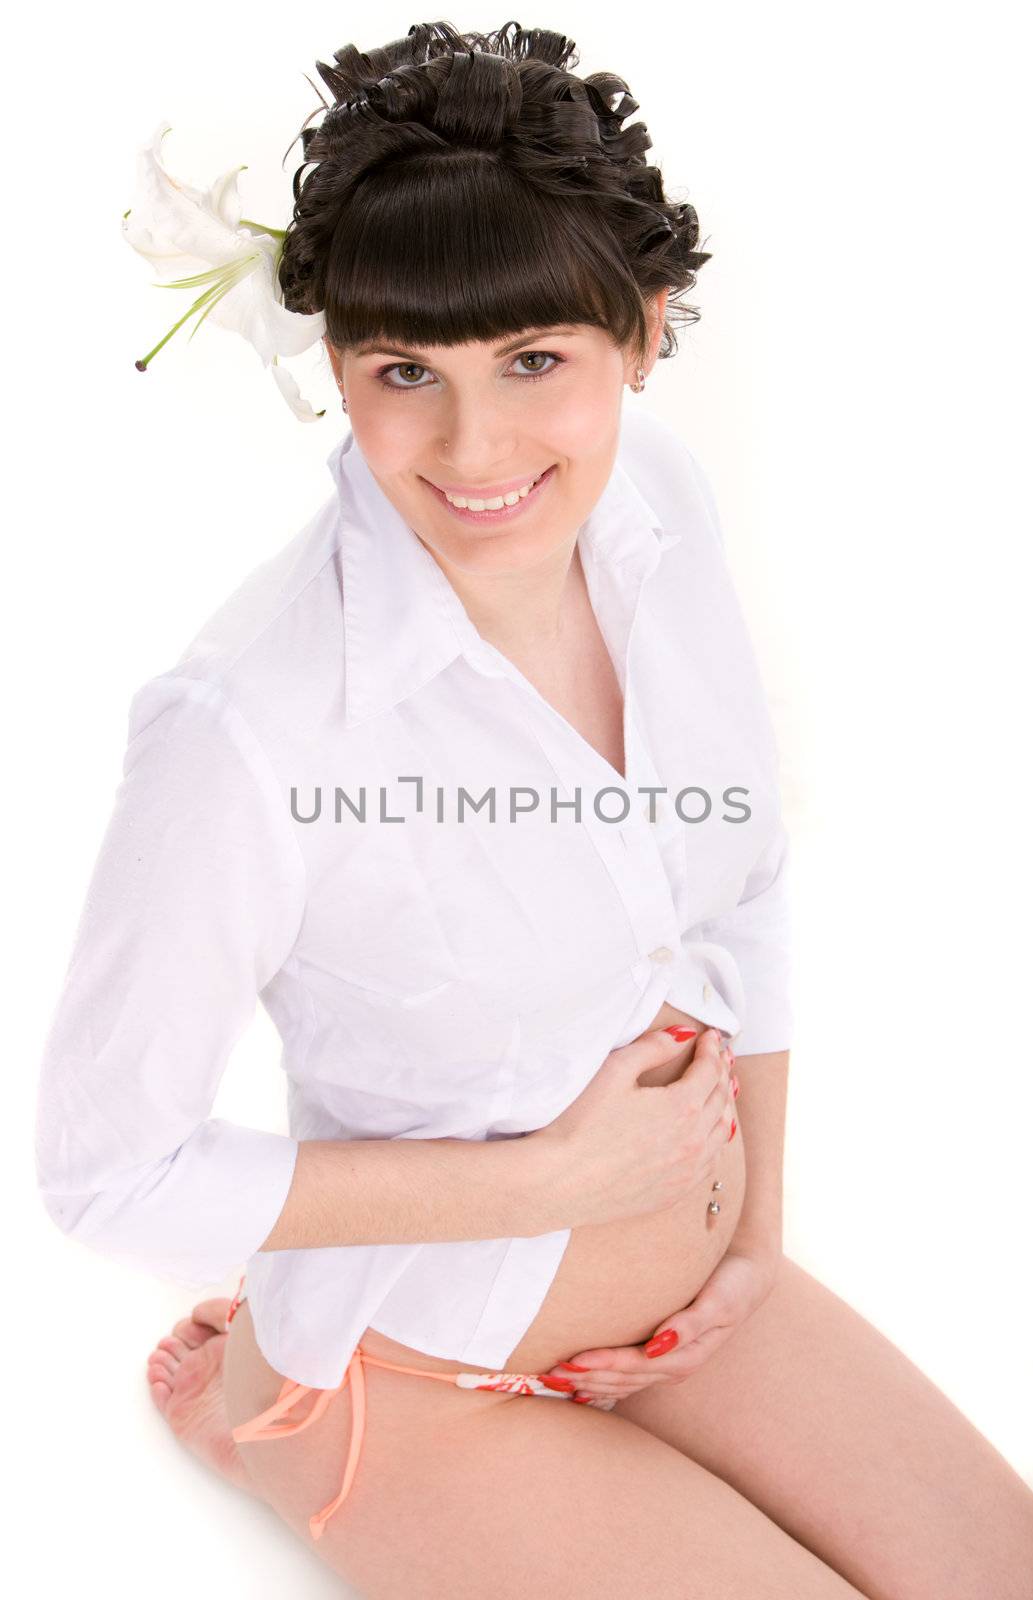 Happy pregnant woman in white t-shirt on isolated background